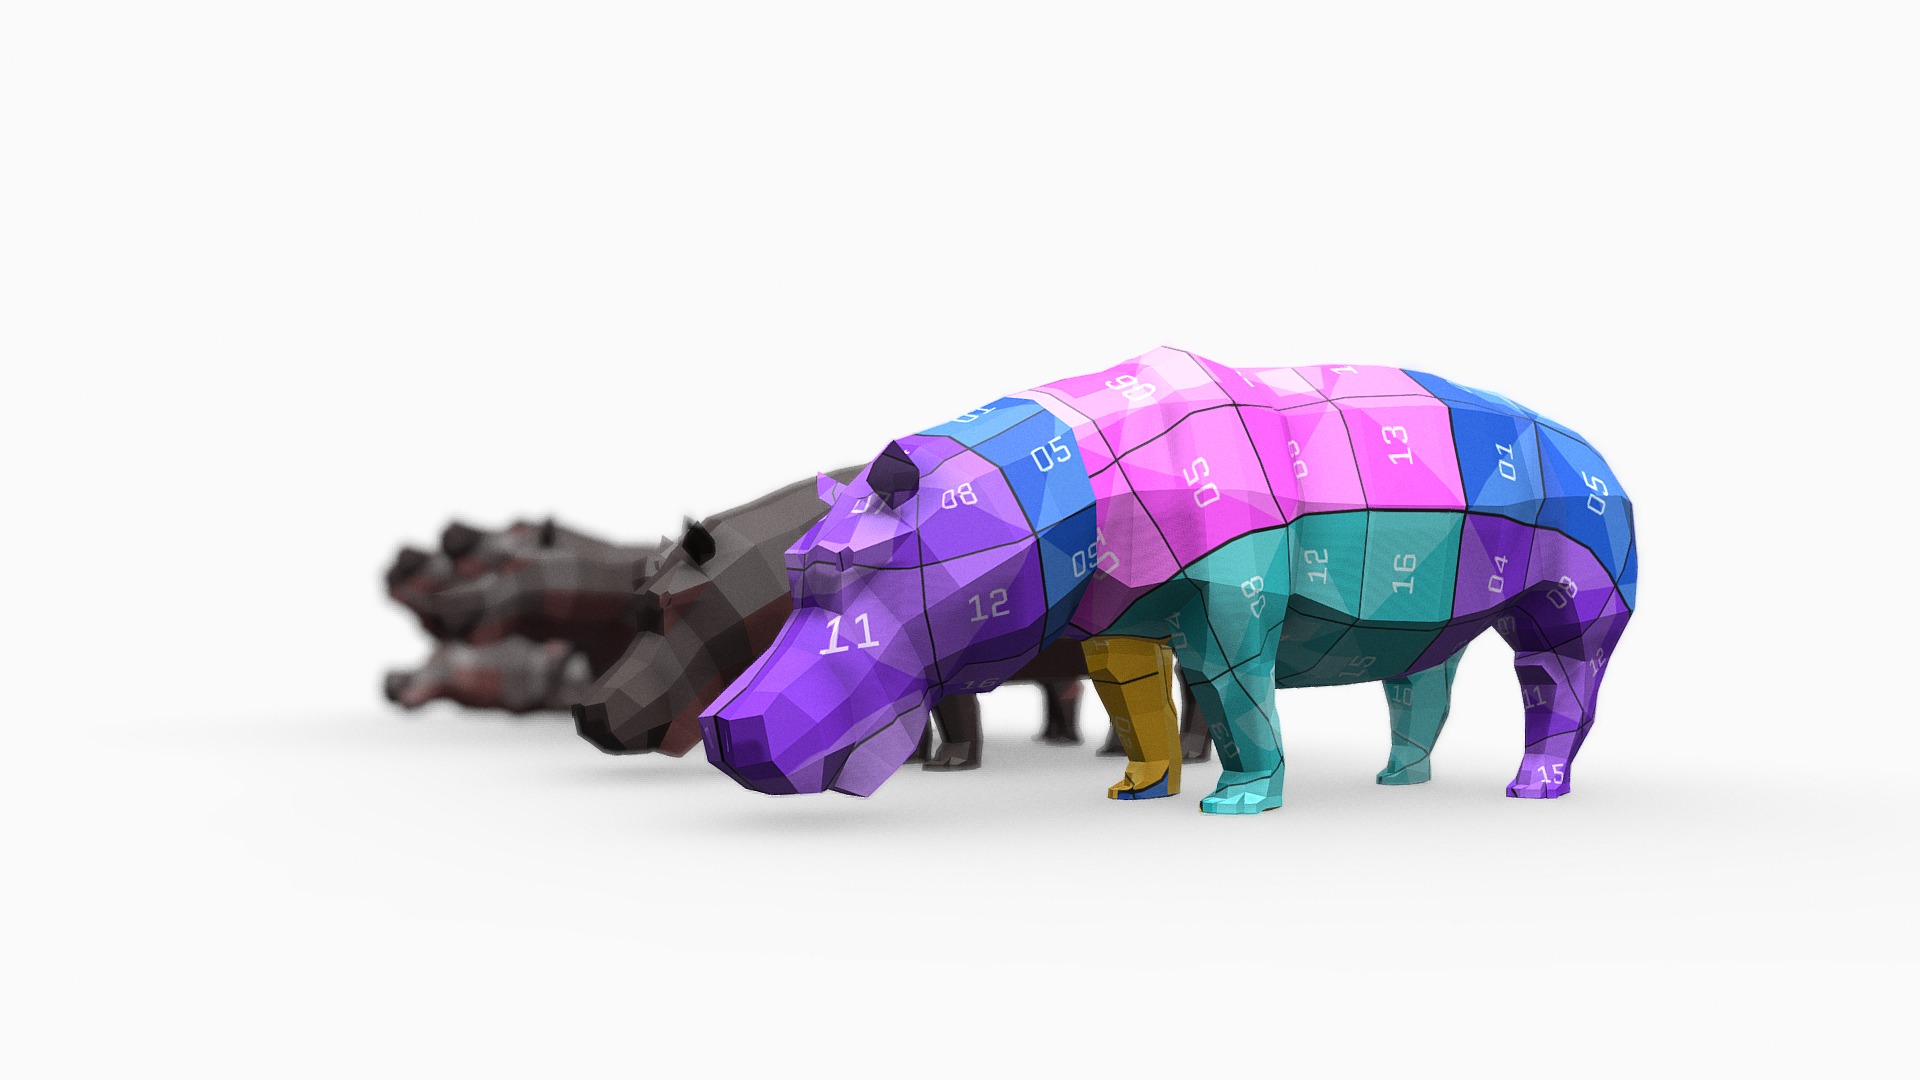 3D model Hippo - This is a 3D model of the Hippo. The 3D model is about a toy dinosaur with a purple and yellow body.